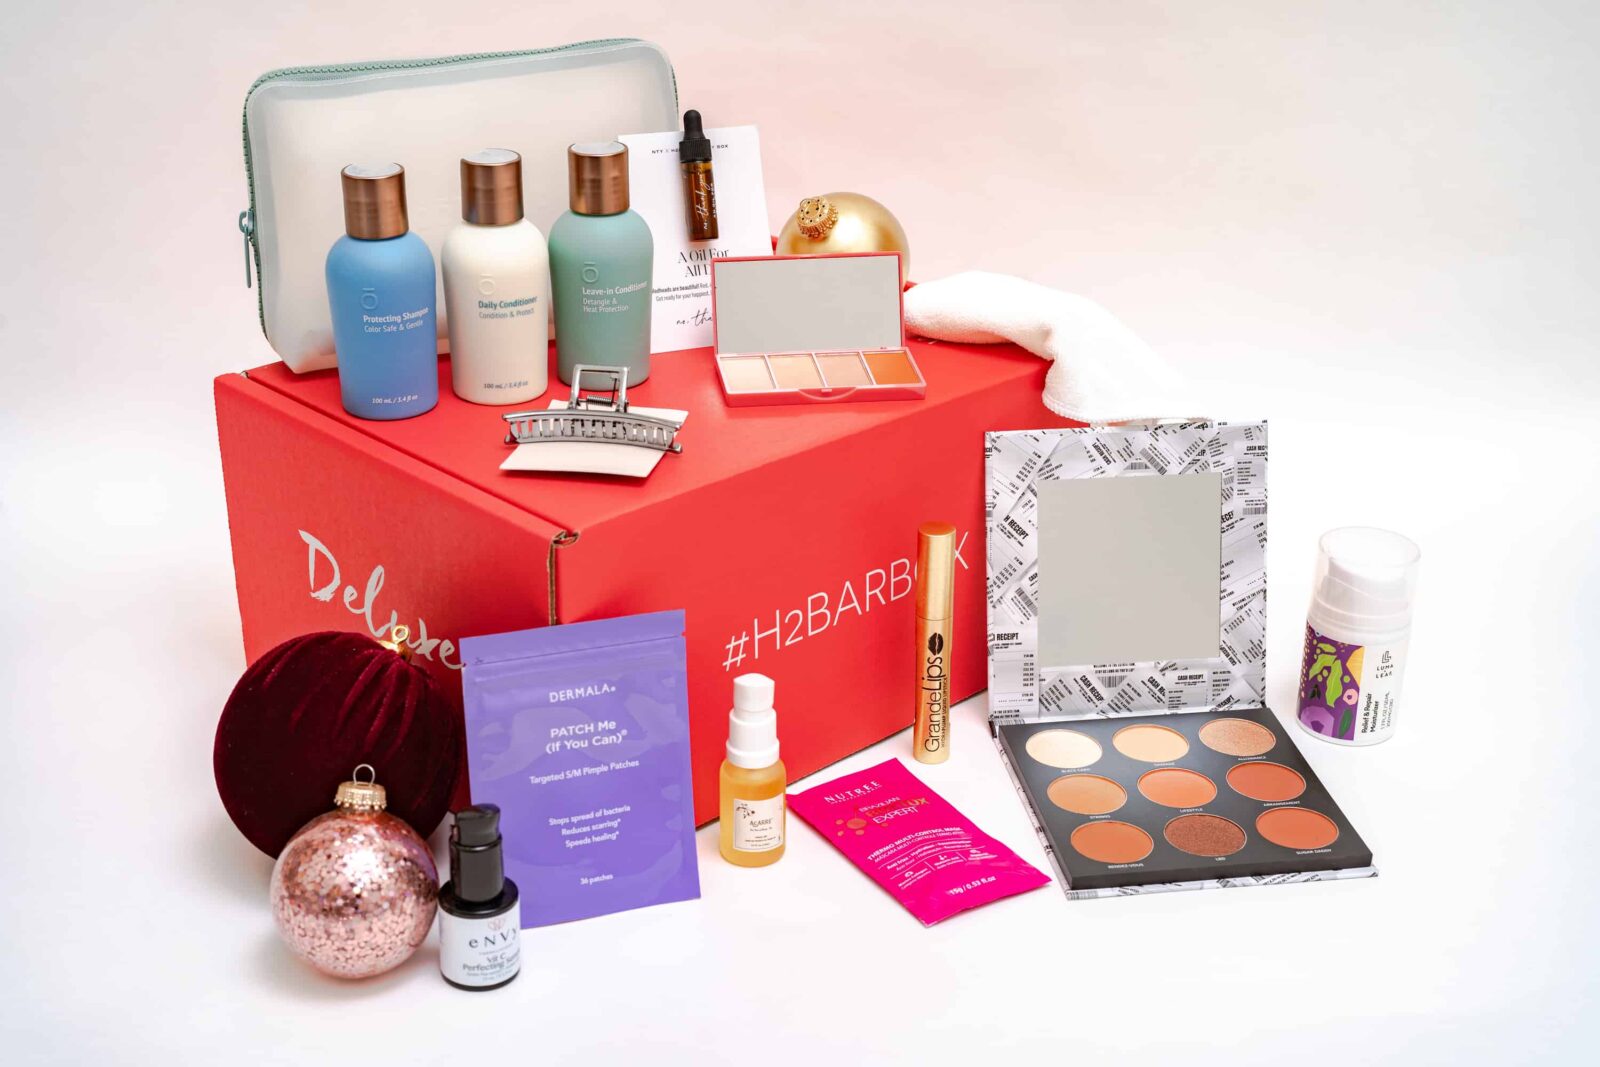 Take a Look Inside the Winter Deluxe H2BAR Box: $250+ Value